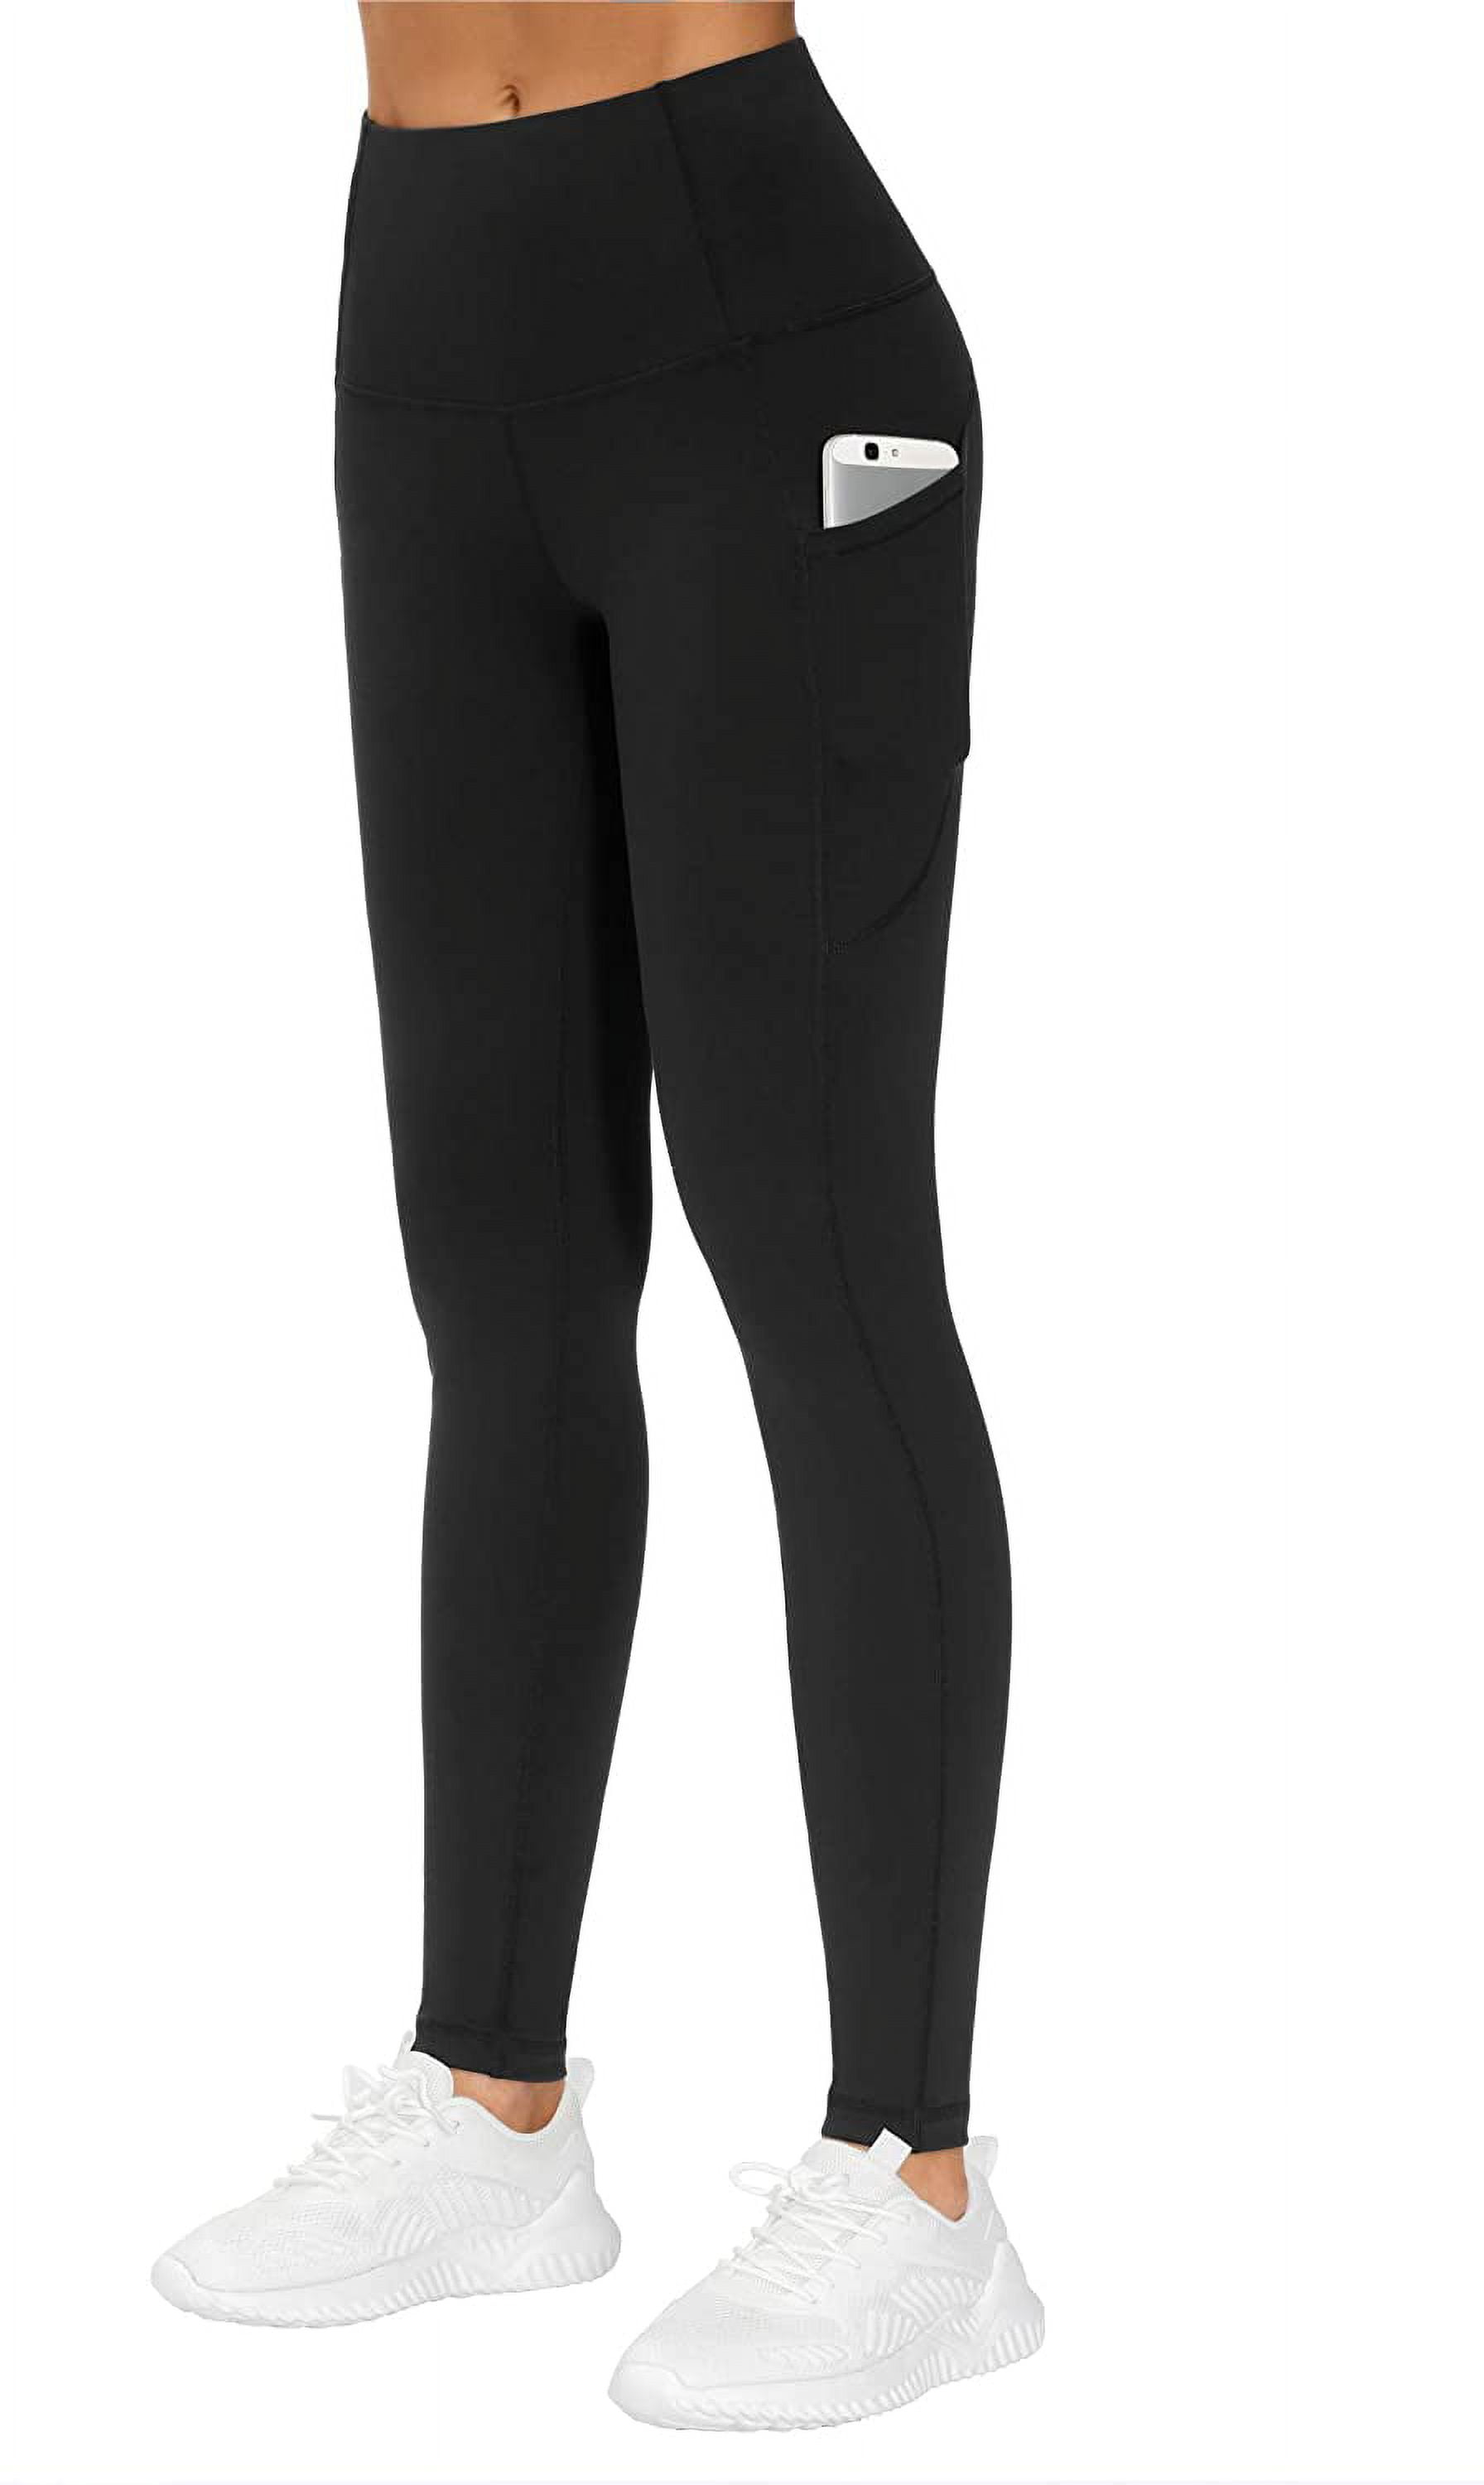 Buy SHAPERX Women's Tummy Control Yoga Pants with High Waist and Running  Yoga Leggings with Convenient Pockets for Workouts Pack of 1 (26, Black) at